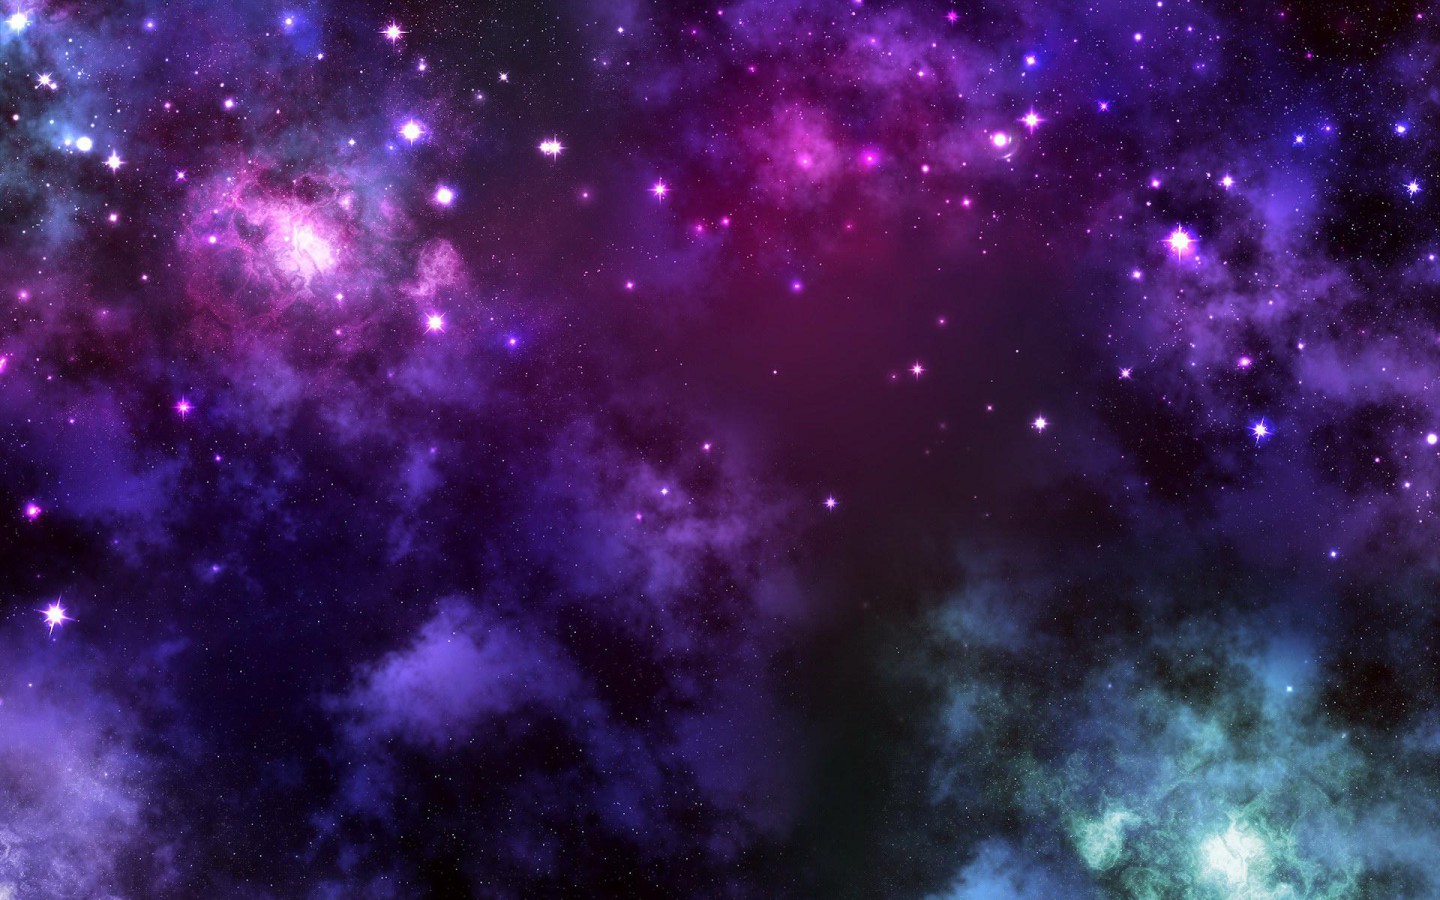 Outer Space wallpaper | 1920x1080 | #56387